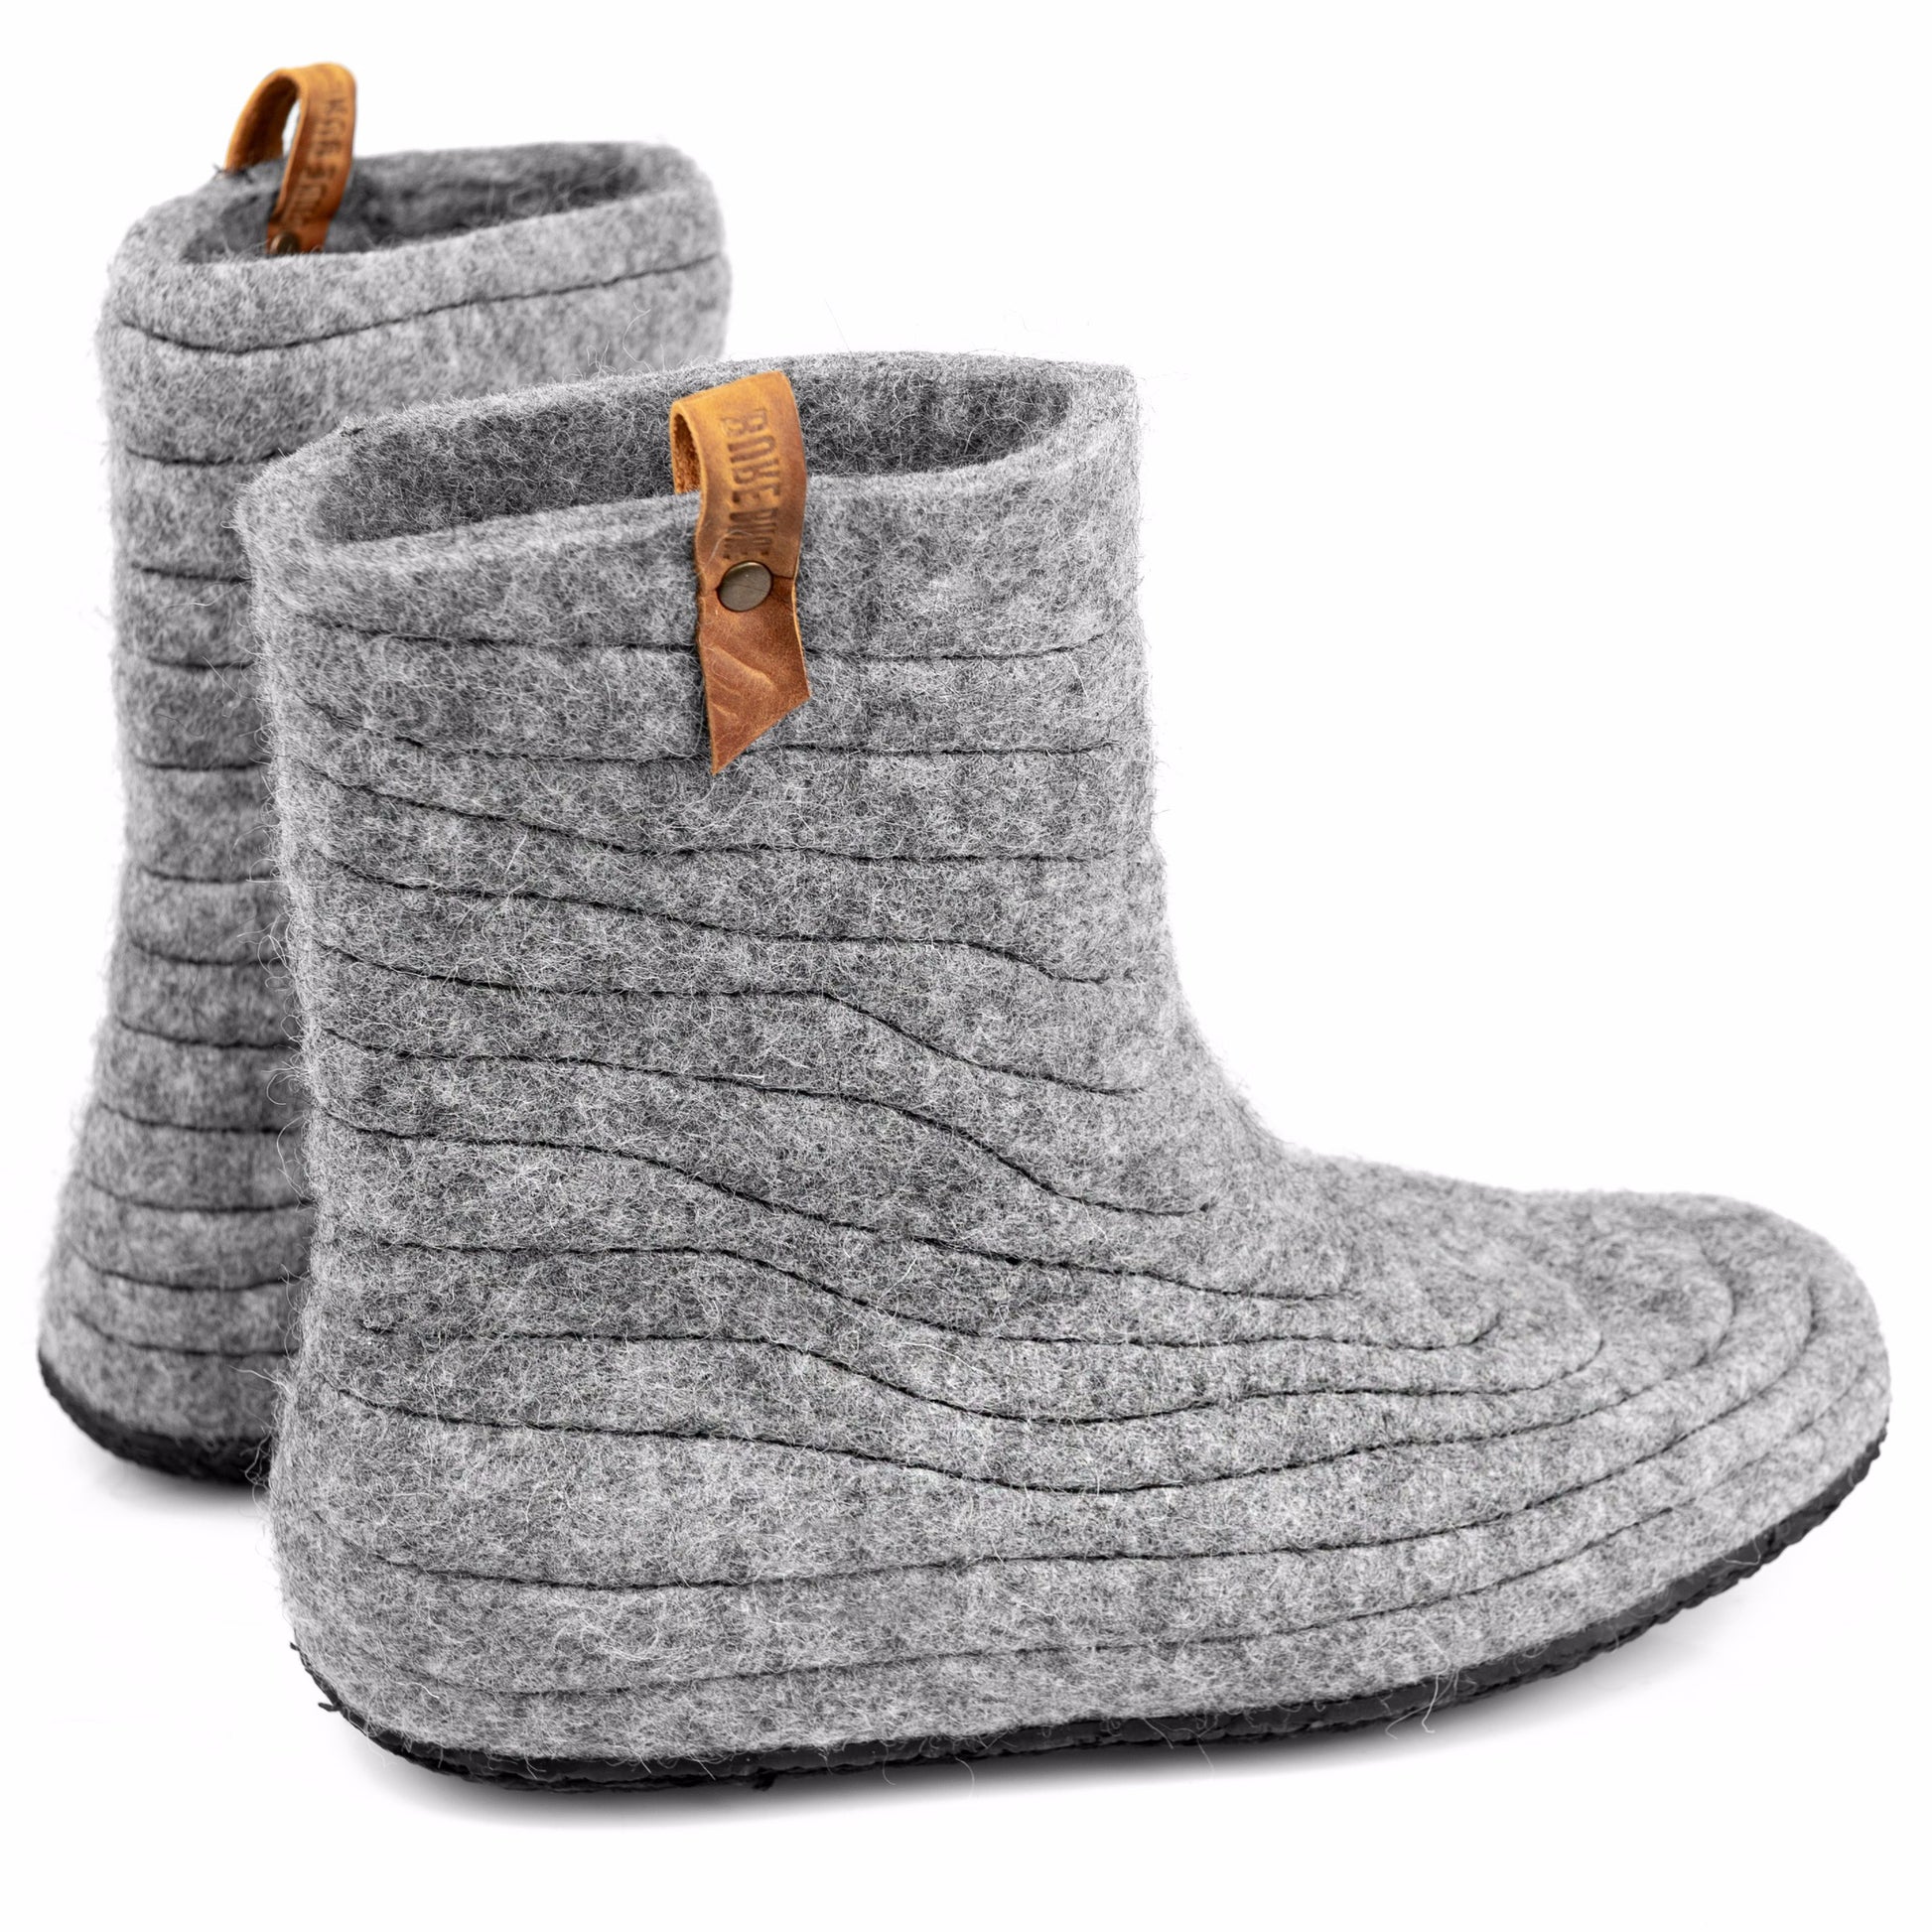 High Felted Wool Boots from Undyed Gray Wool